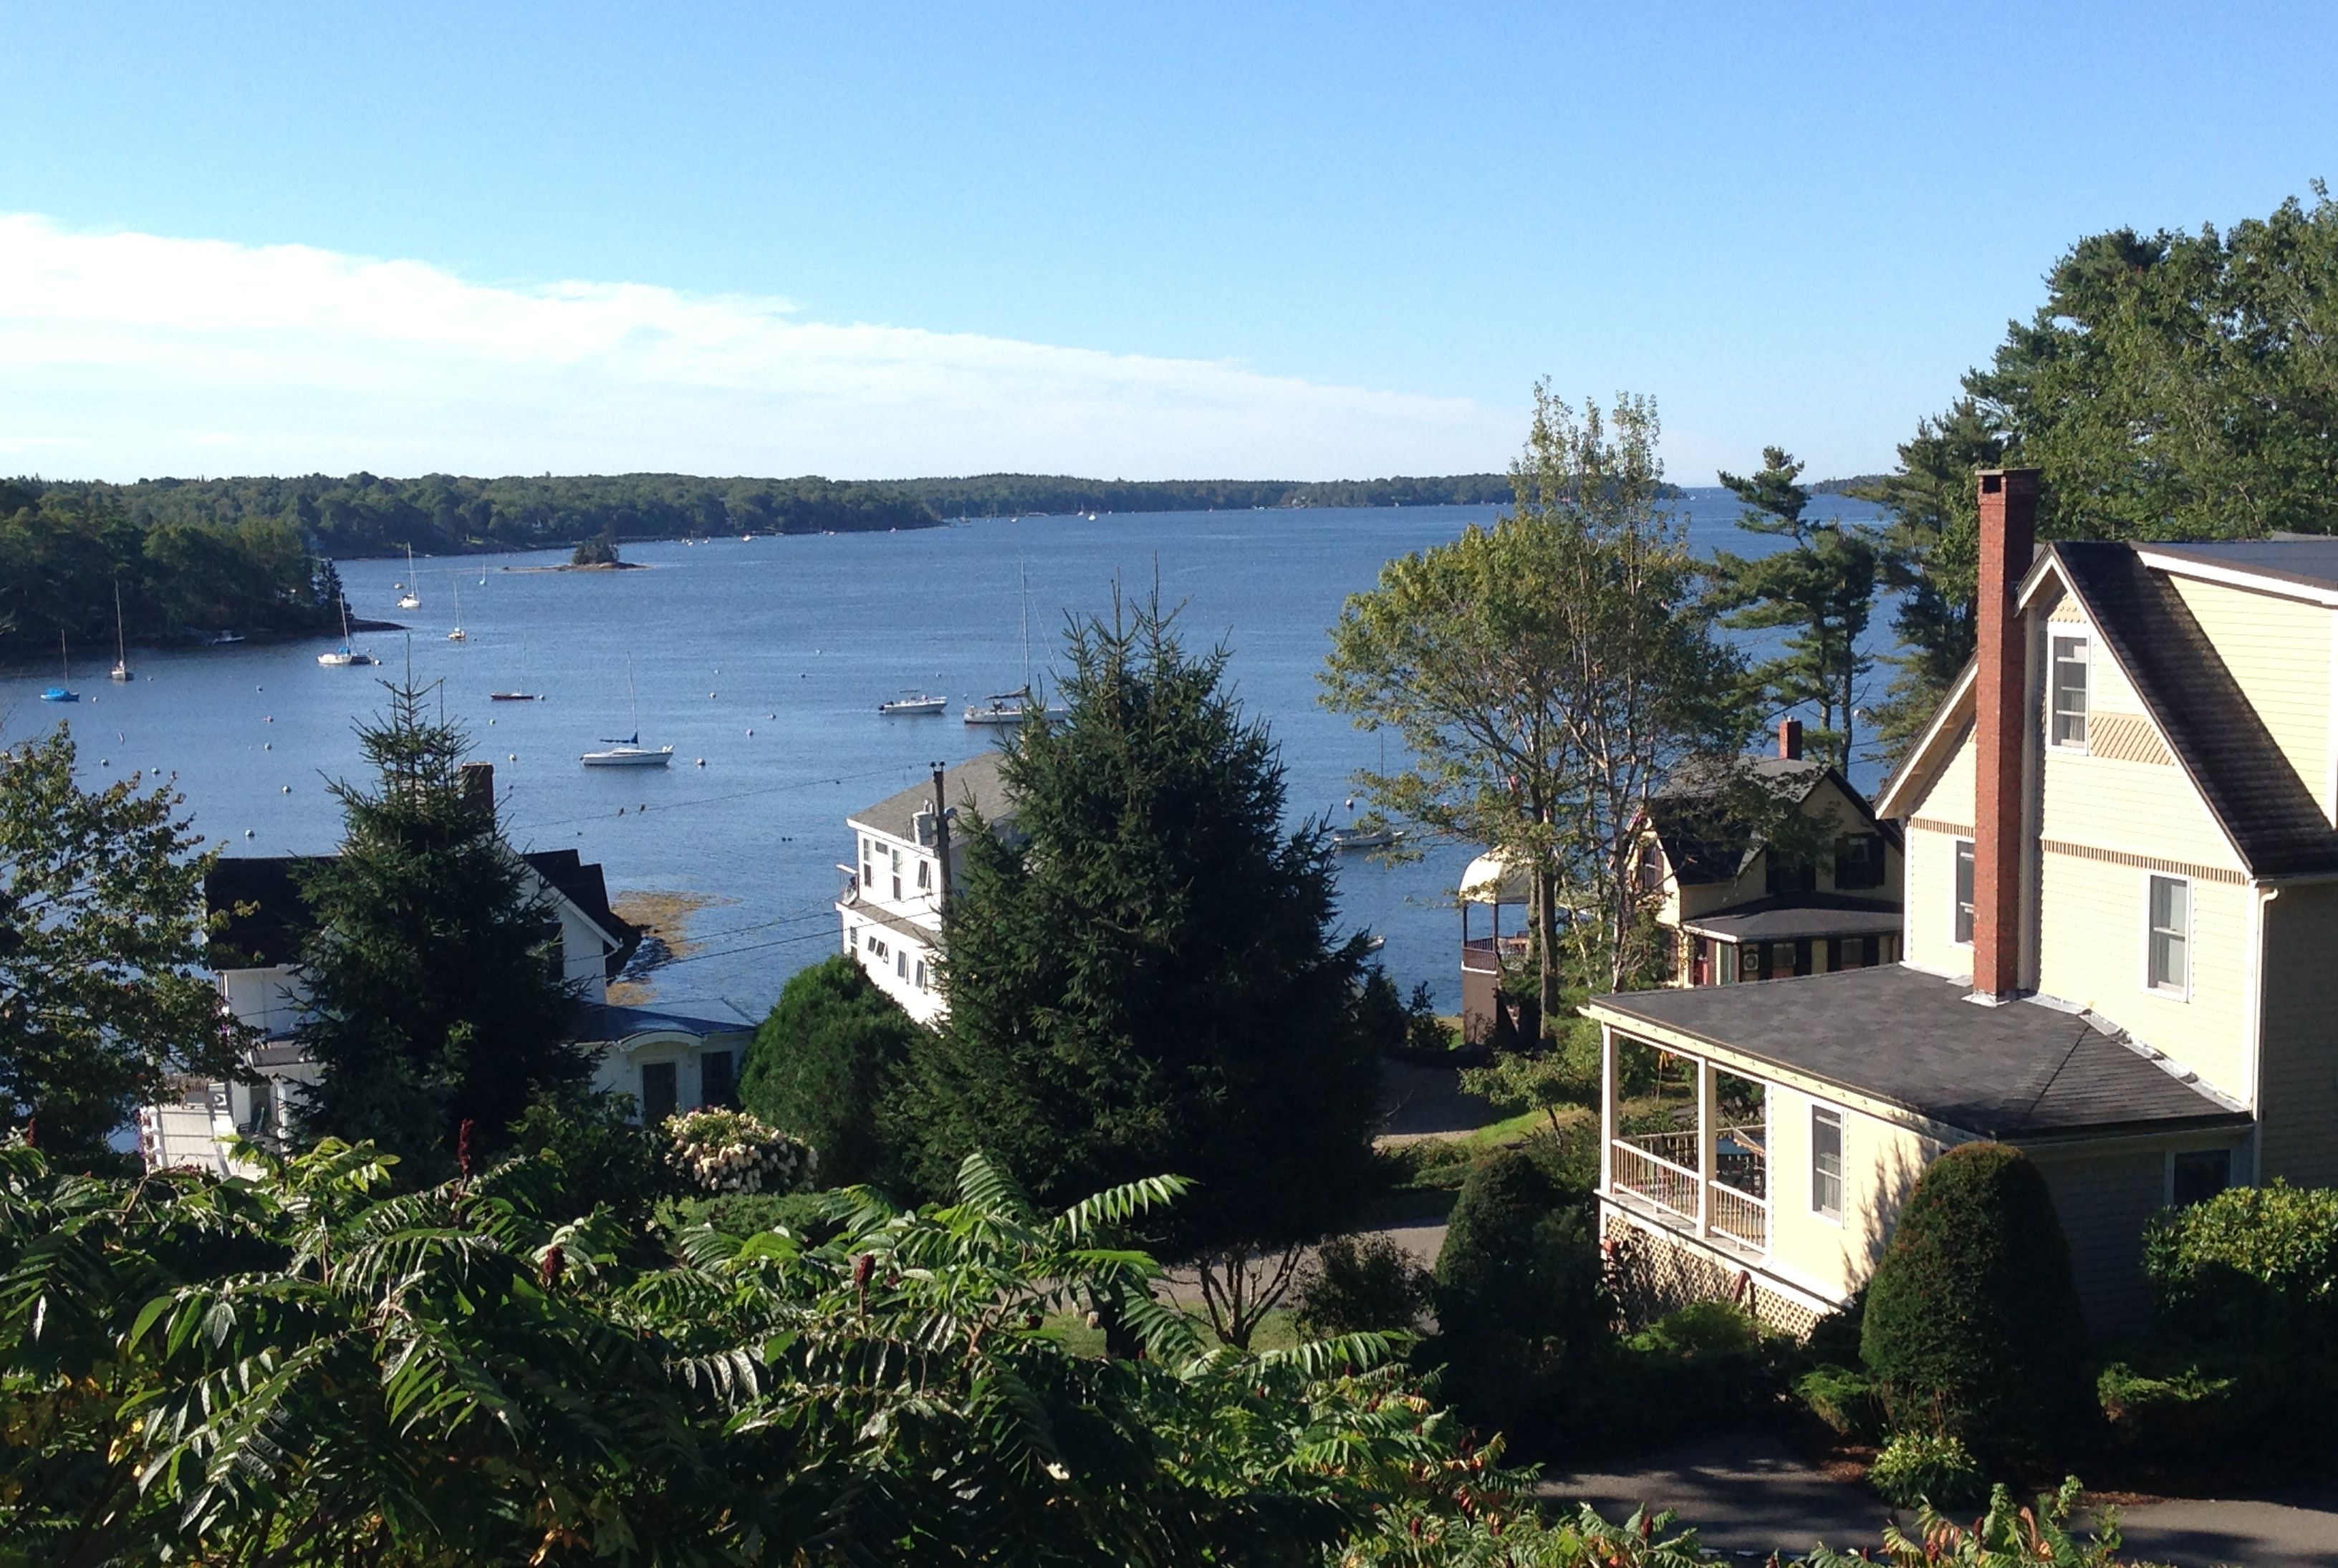  bed and breakfast inn for sale - Confidential Midcoast Waterfront Inn